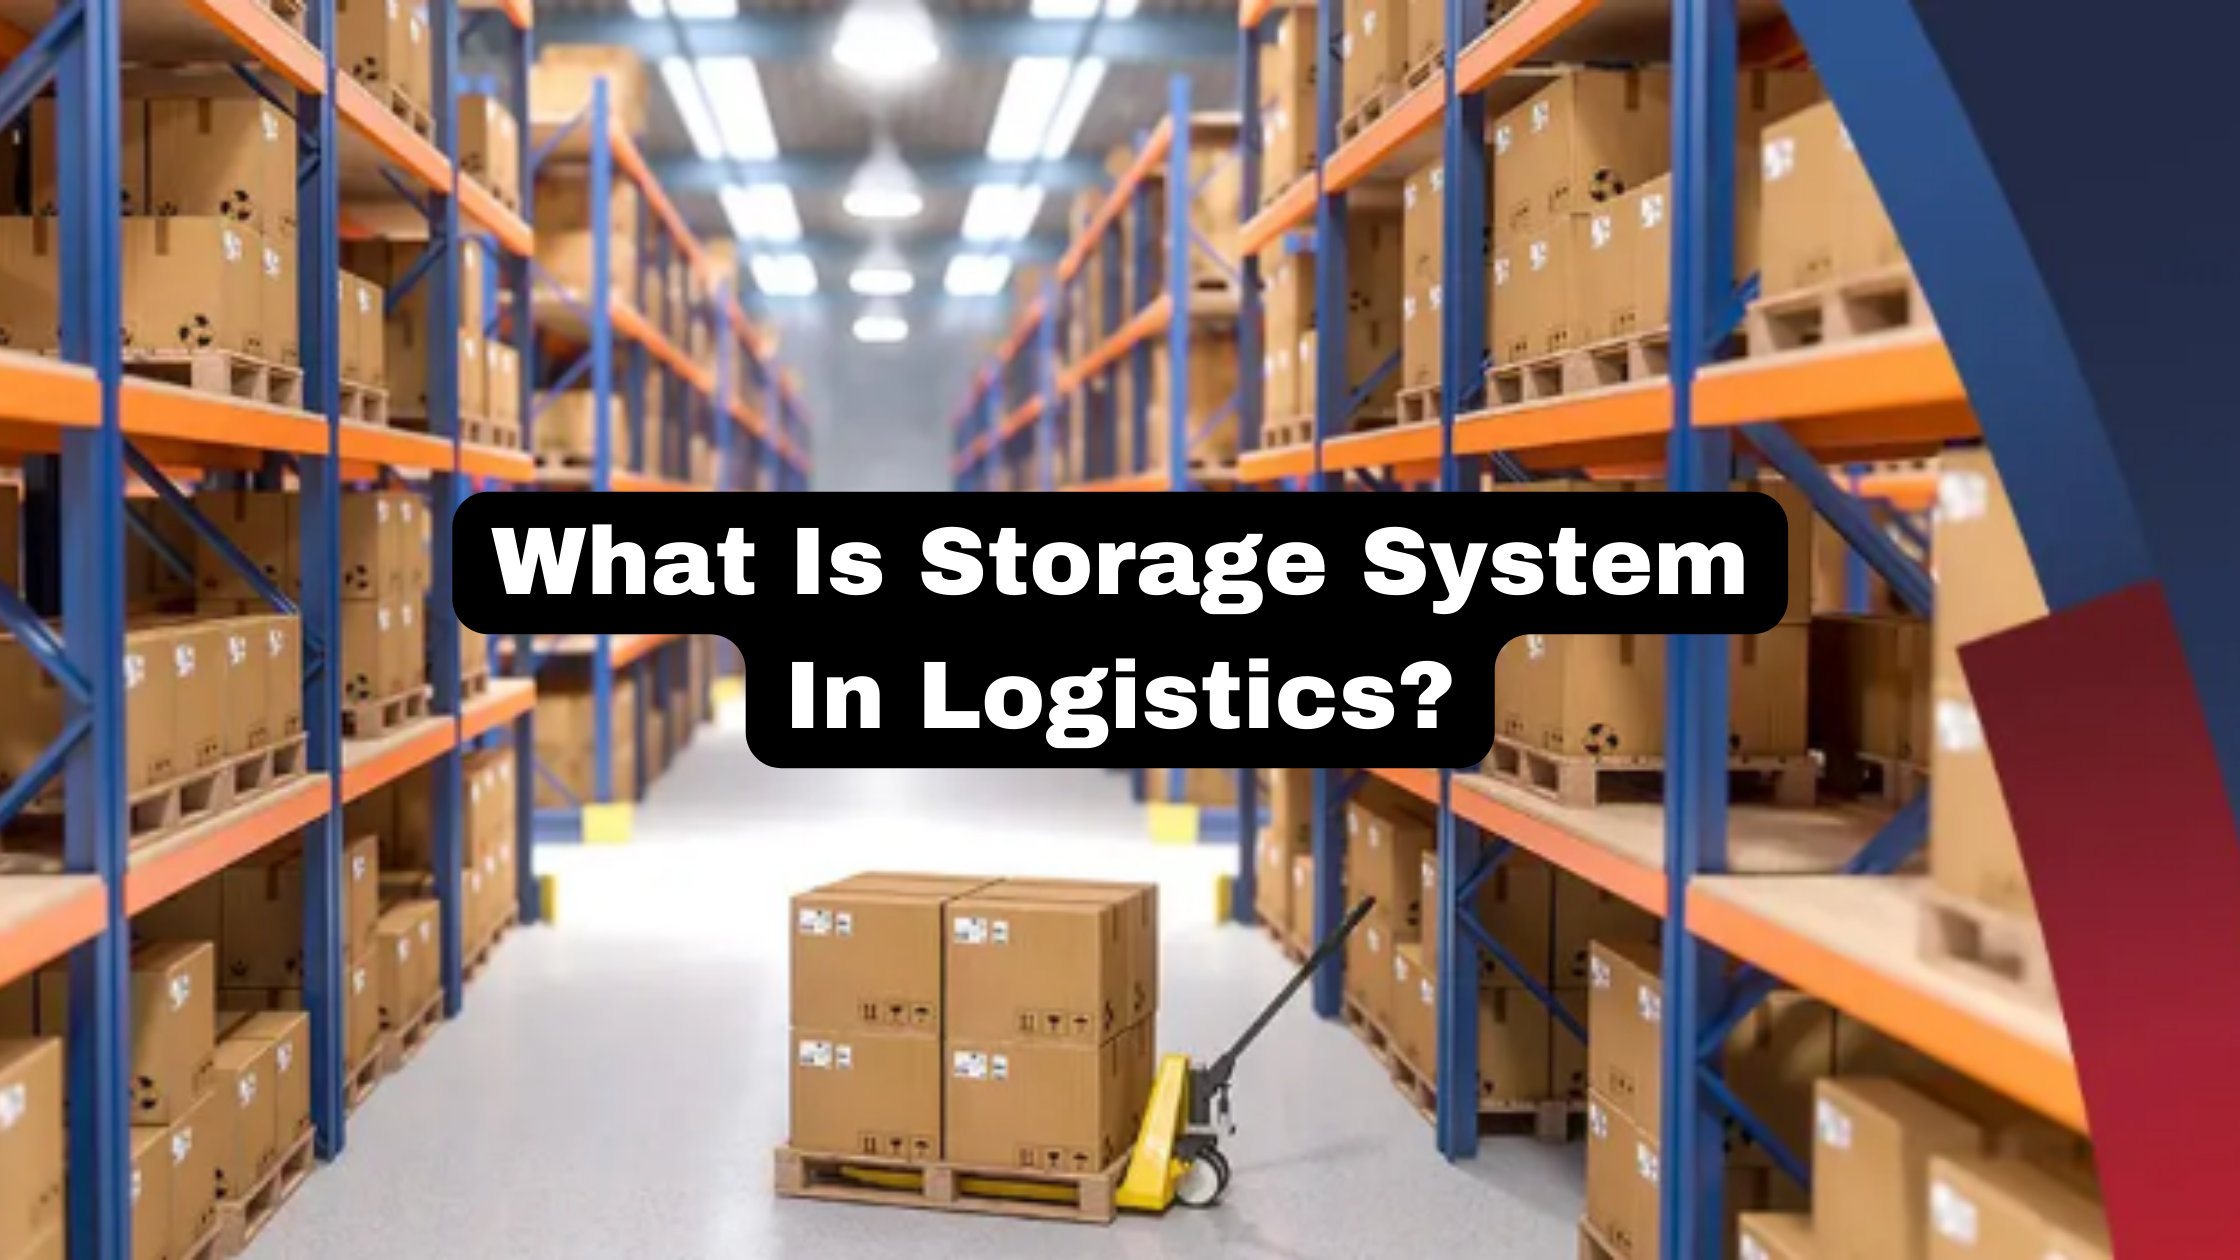 What Is a Storage System In Logistics